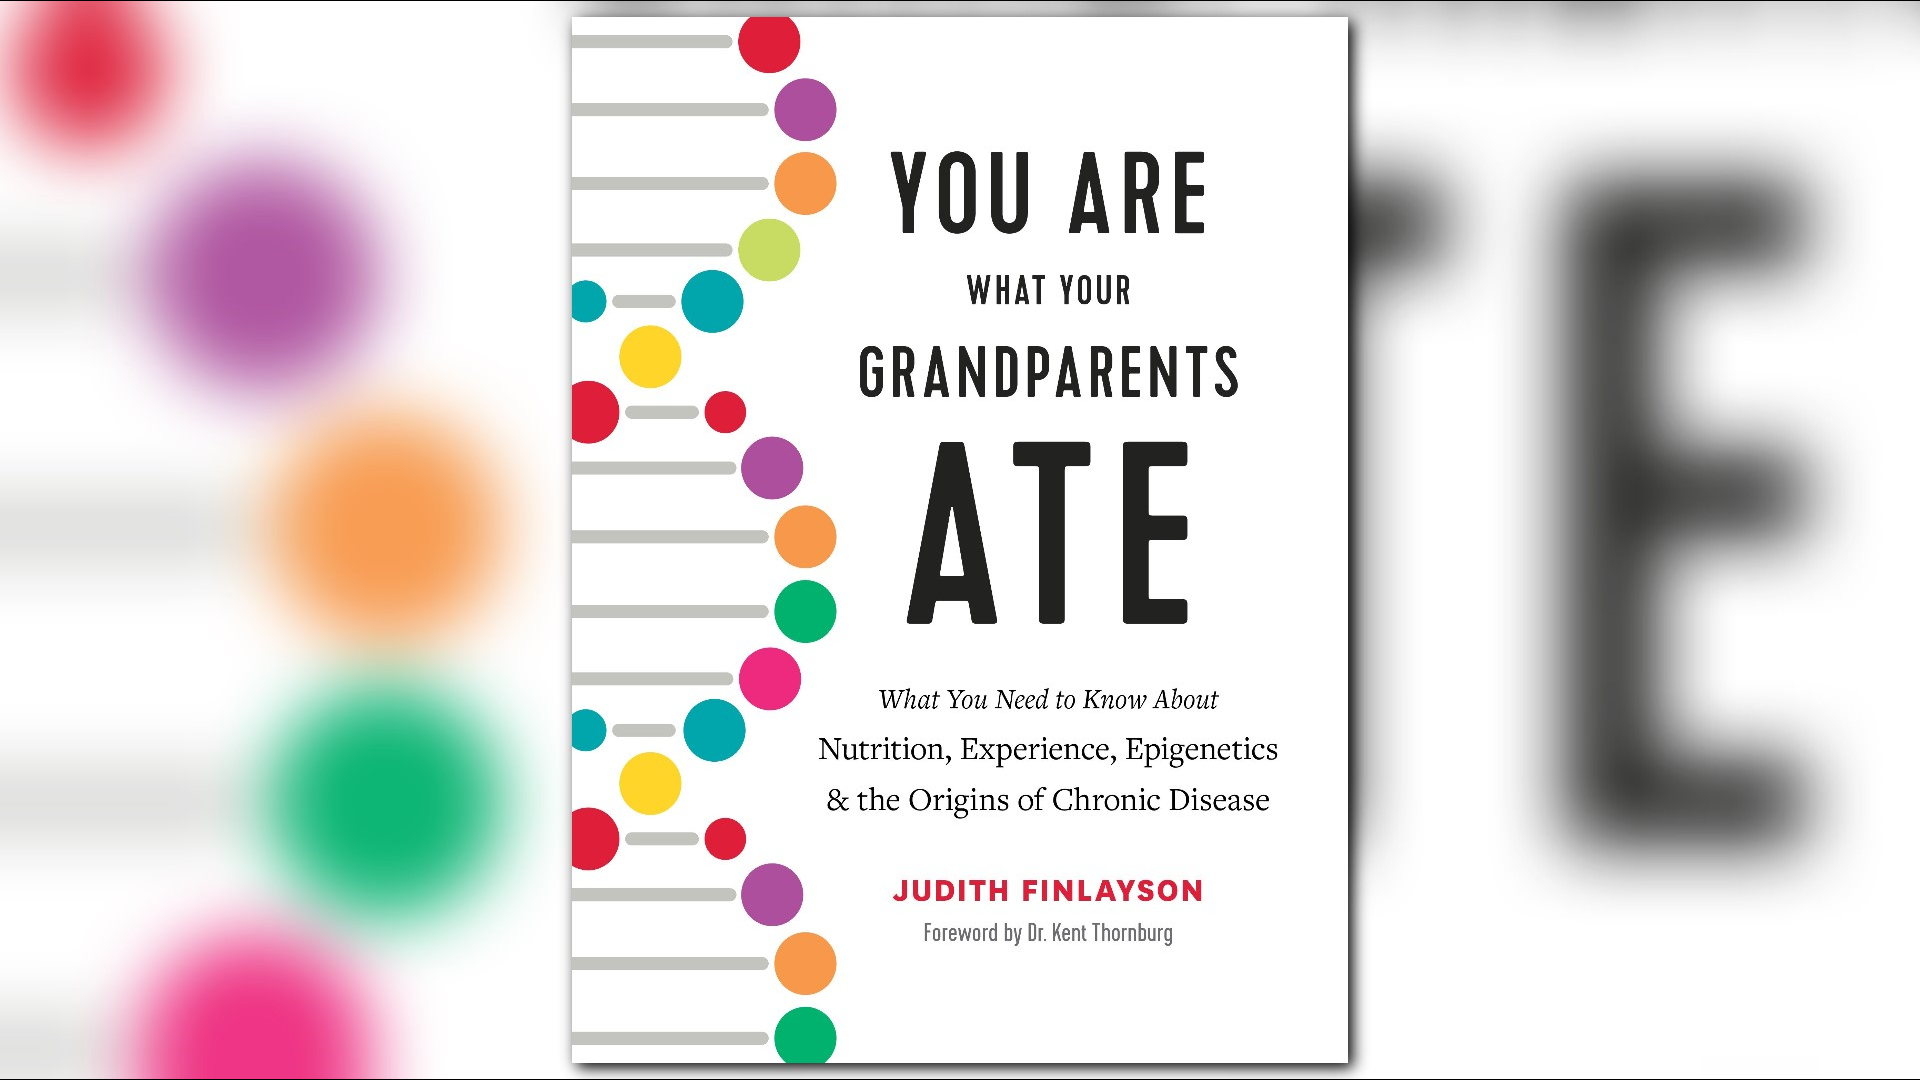 Author, Judith Finlayson, discusses her new book "You Are What Your Grandparents Ate" and how the life of previous generations directly affects your health.